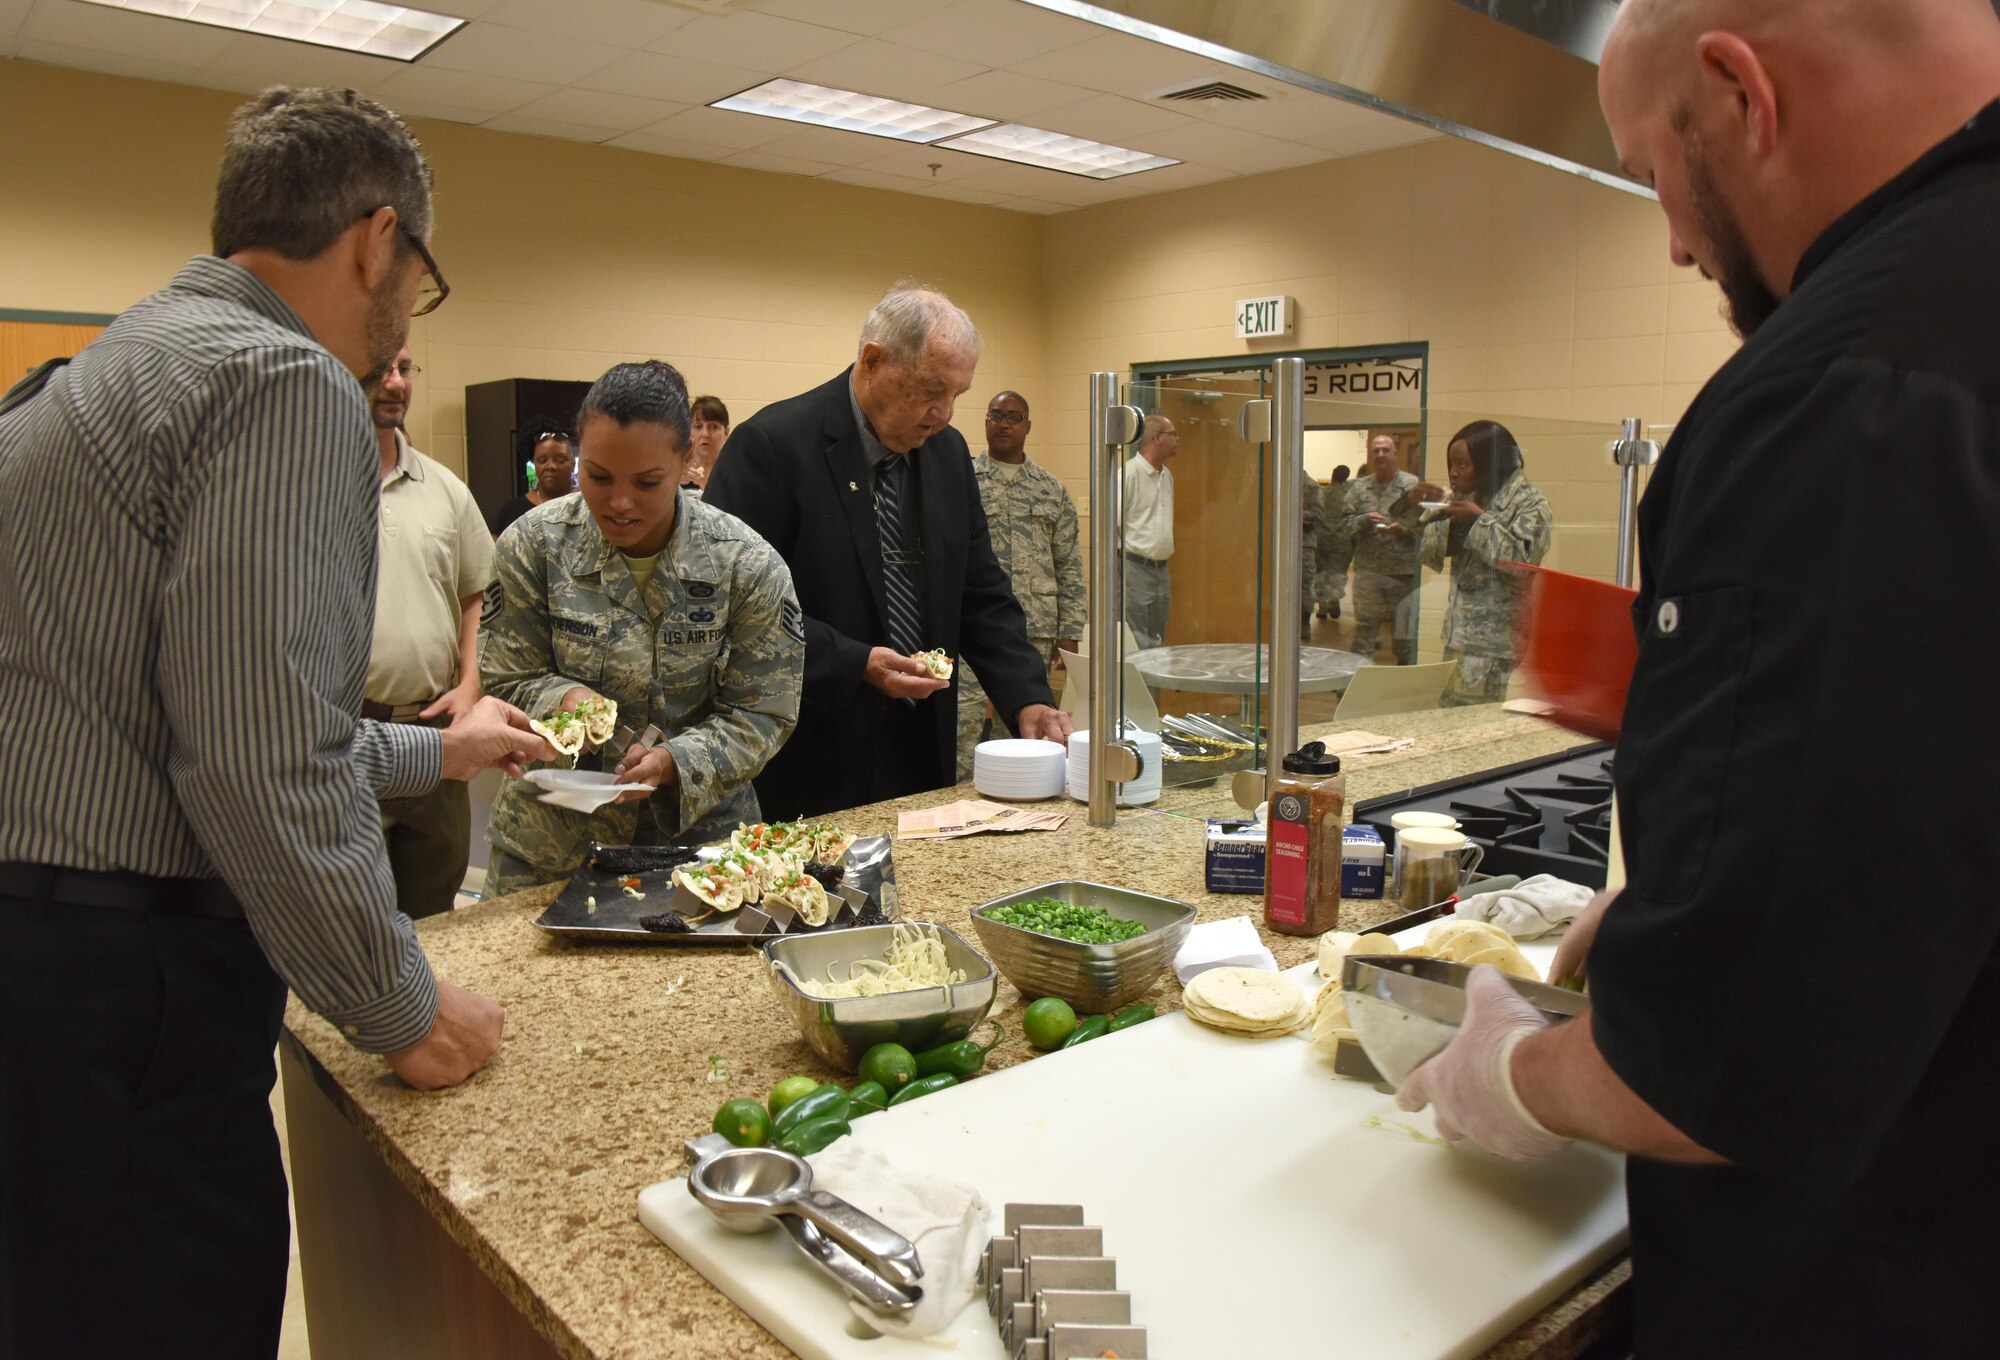 Keesler personnel sample food from a kitchen demo during the McBride Commons Grand Opening ceremony May 16, 2017, on Keesler Air Force Base, Miss. The nine-month project transformed the former base library into a common area with a children’s library, computer stations, engraving, framing, marketing and print shops and a full kitchen for those with base access. (U.S. Air Force photo by Kemberly Groue)